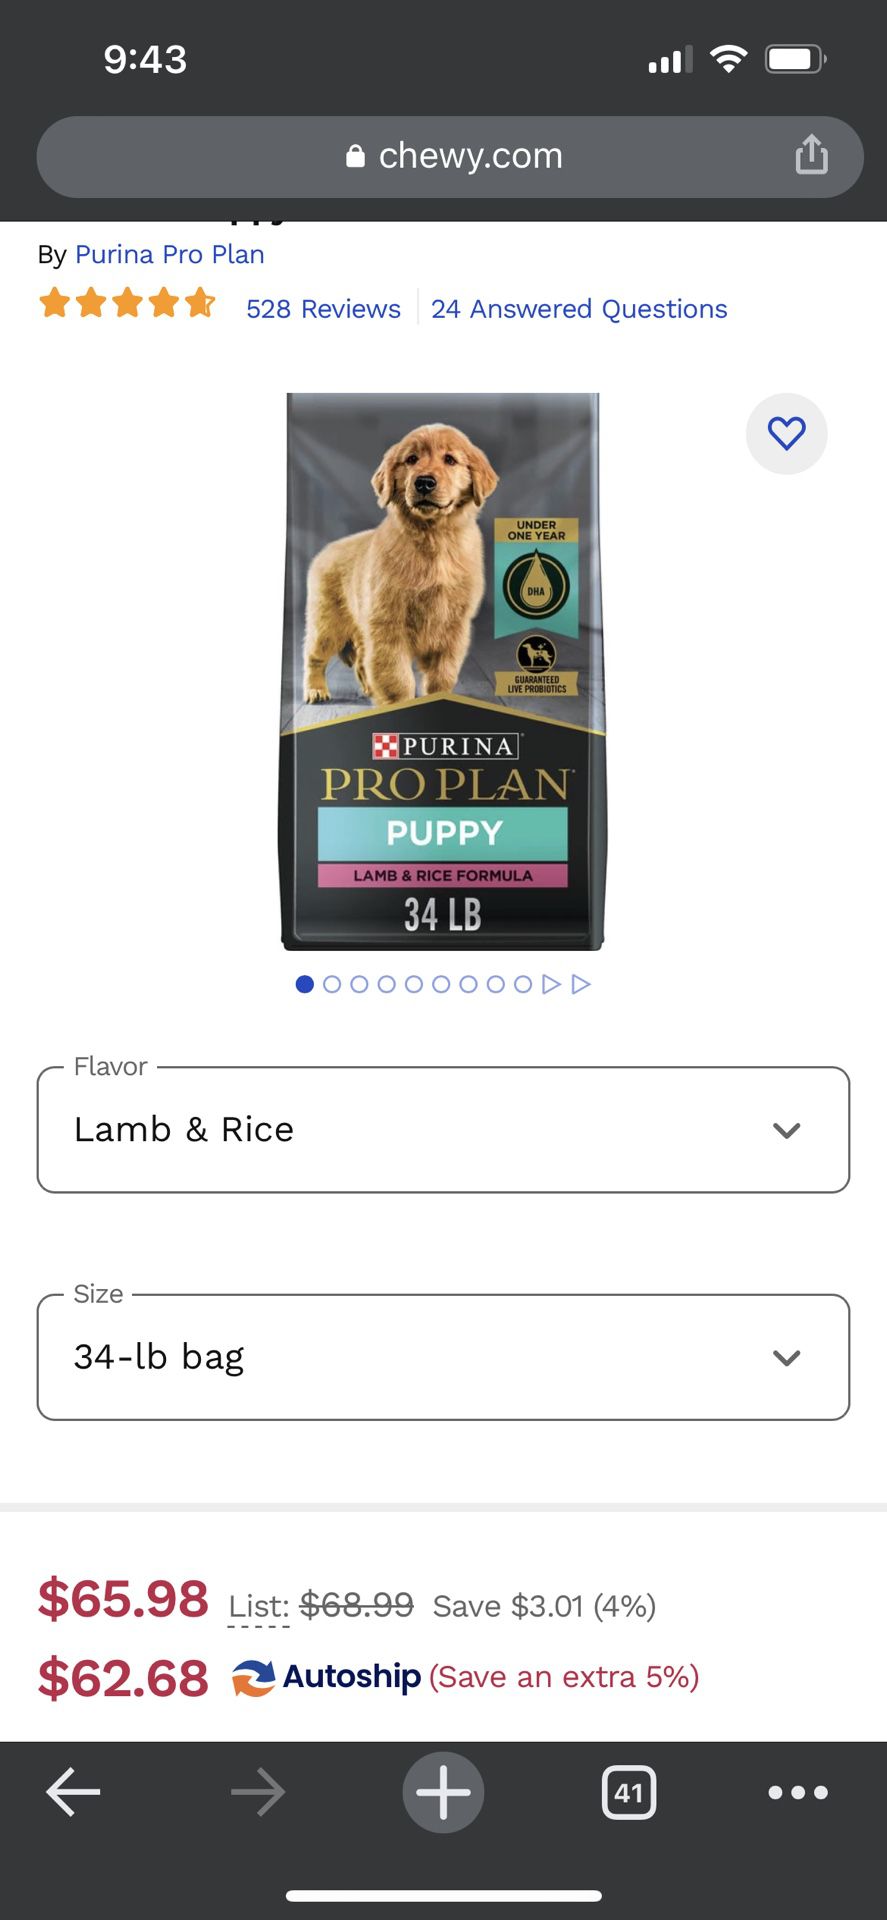 Purina Pro Plan Puppy Dog Food For Sale